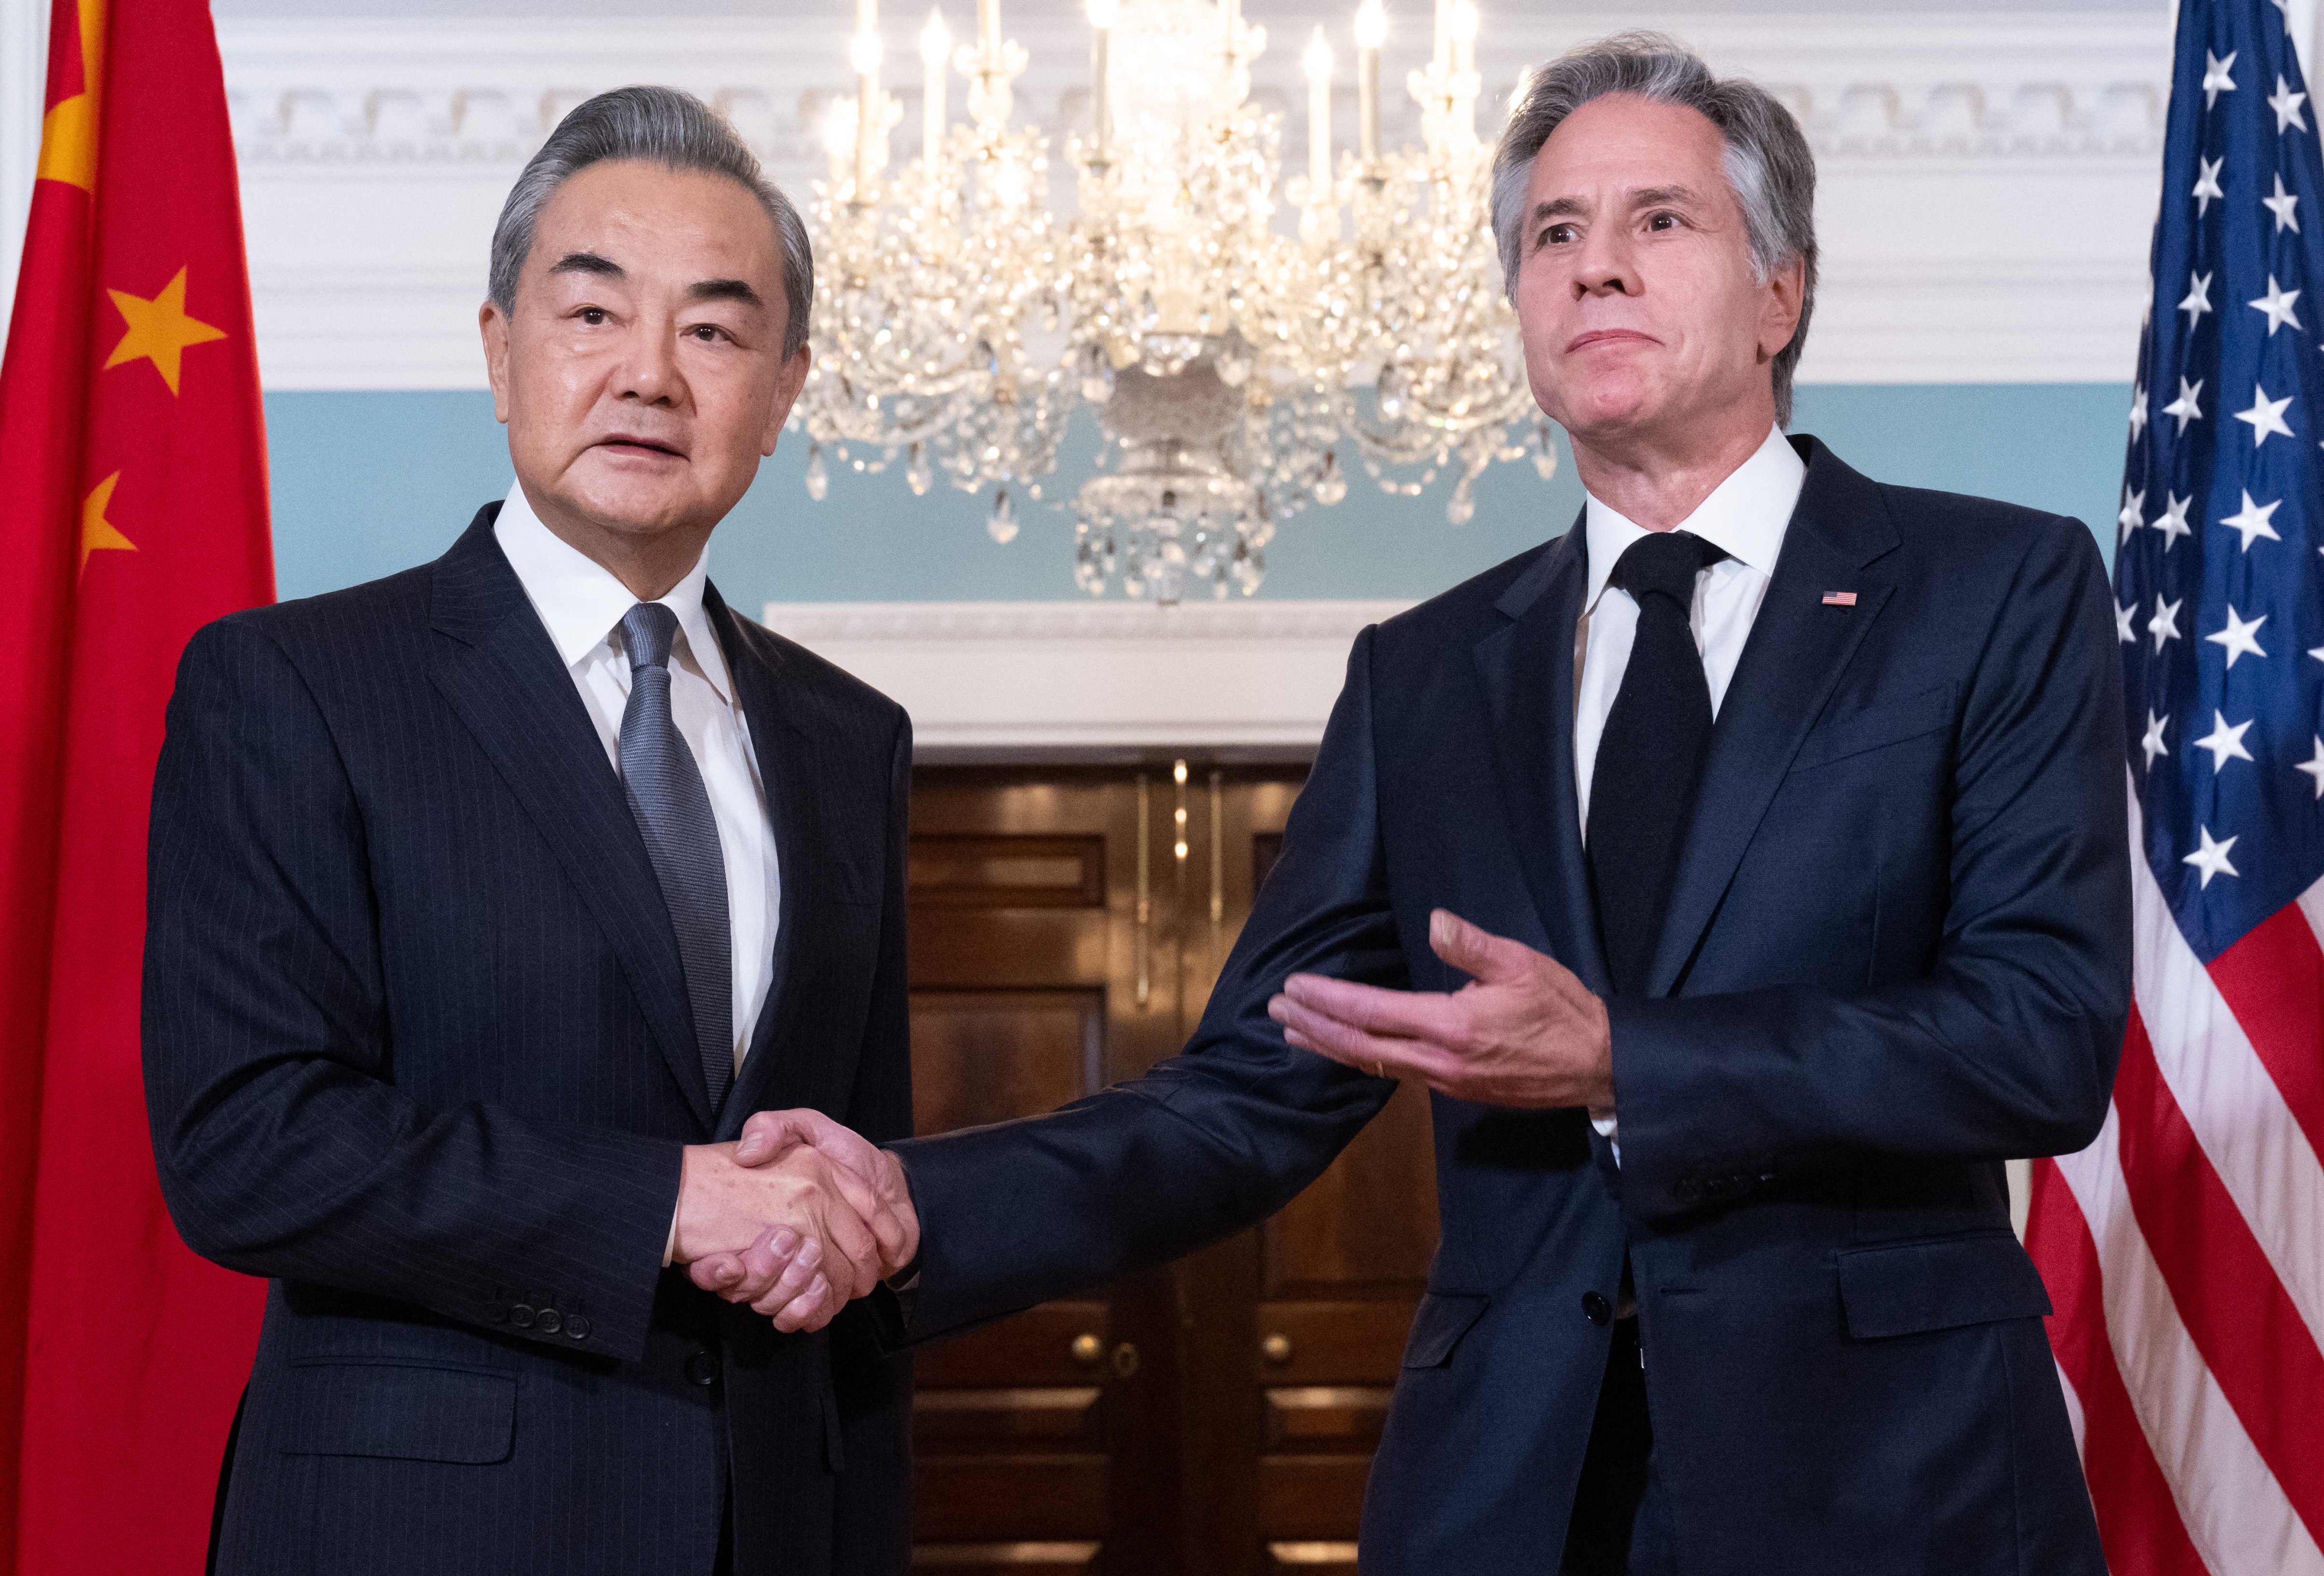 Chinese Foreign Minister Wang Yi and US Secretary of State Antony Blinken shake hands before their meeting at the State Department in Washington on Thursday. Photo: AFP